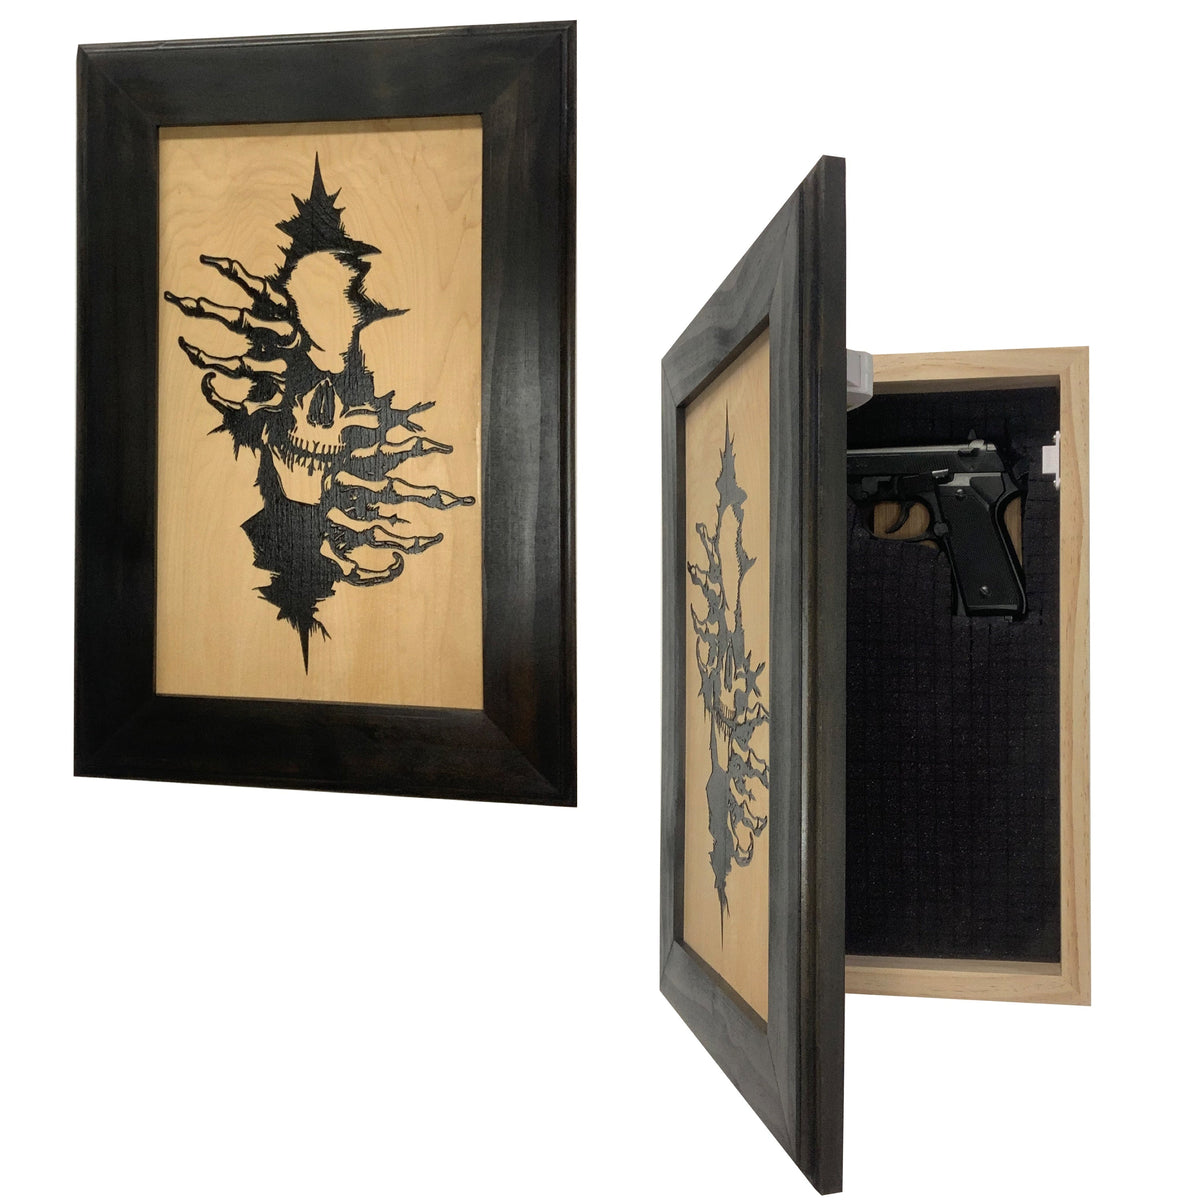 Gothic Skull Through The Wall Decorative Gun Cabinet To Securely Store Your Gun In Any Room!